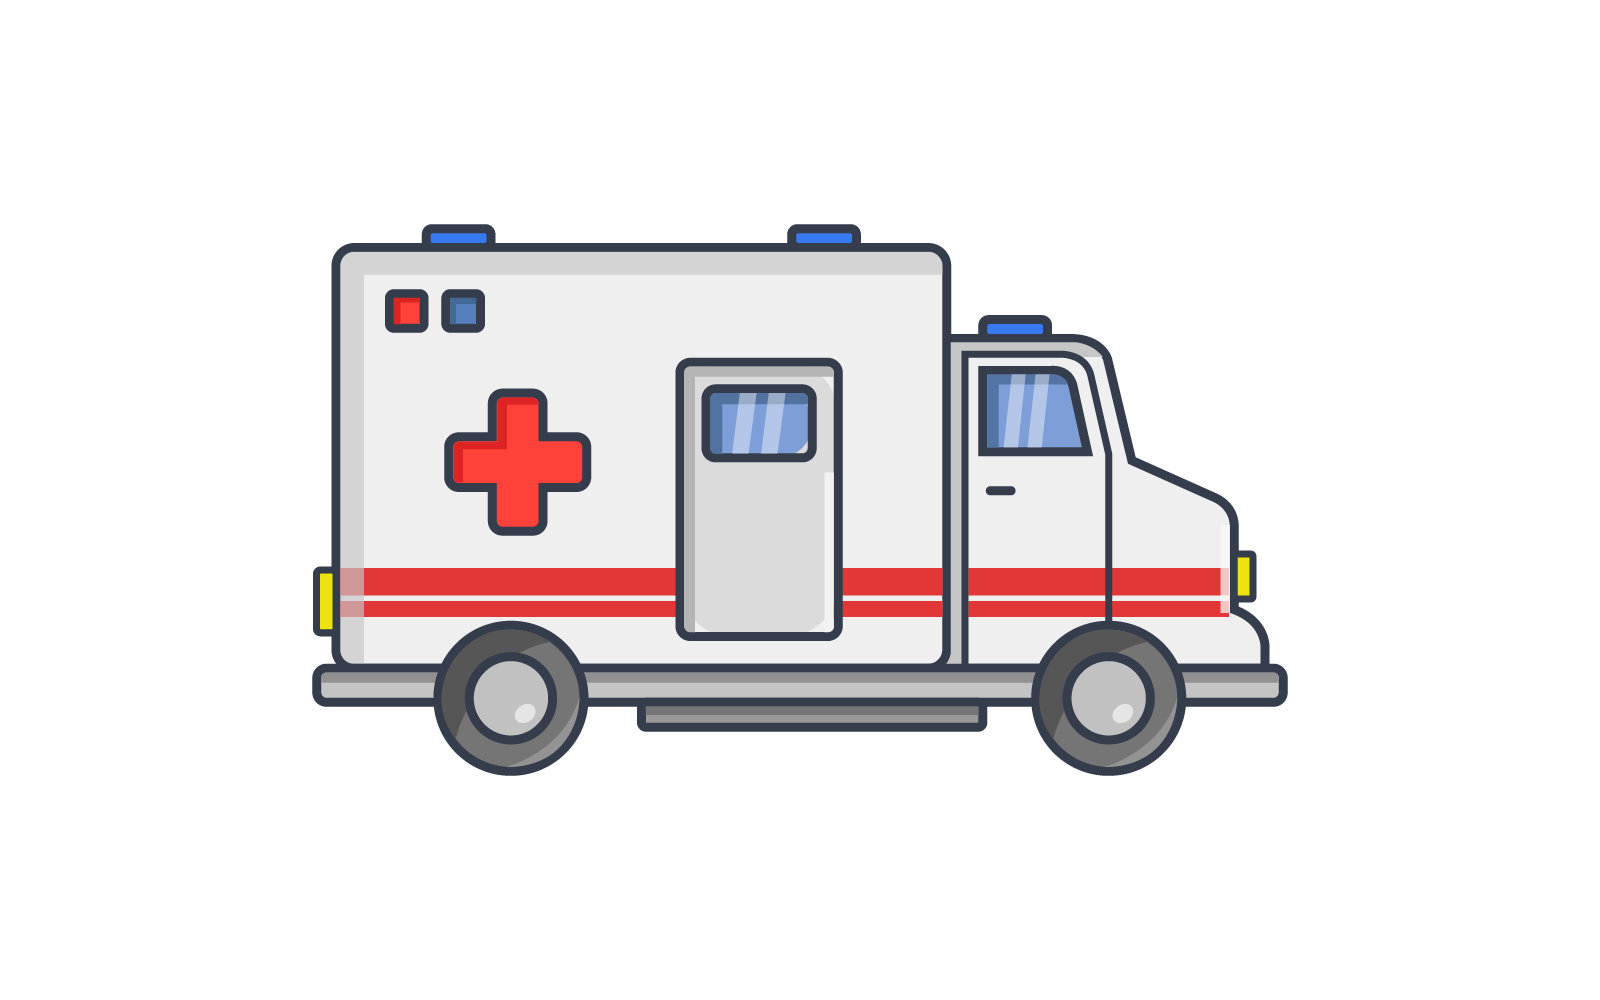 Ambulance illustrated in vector